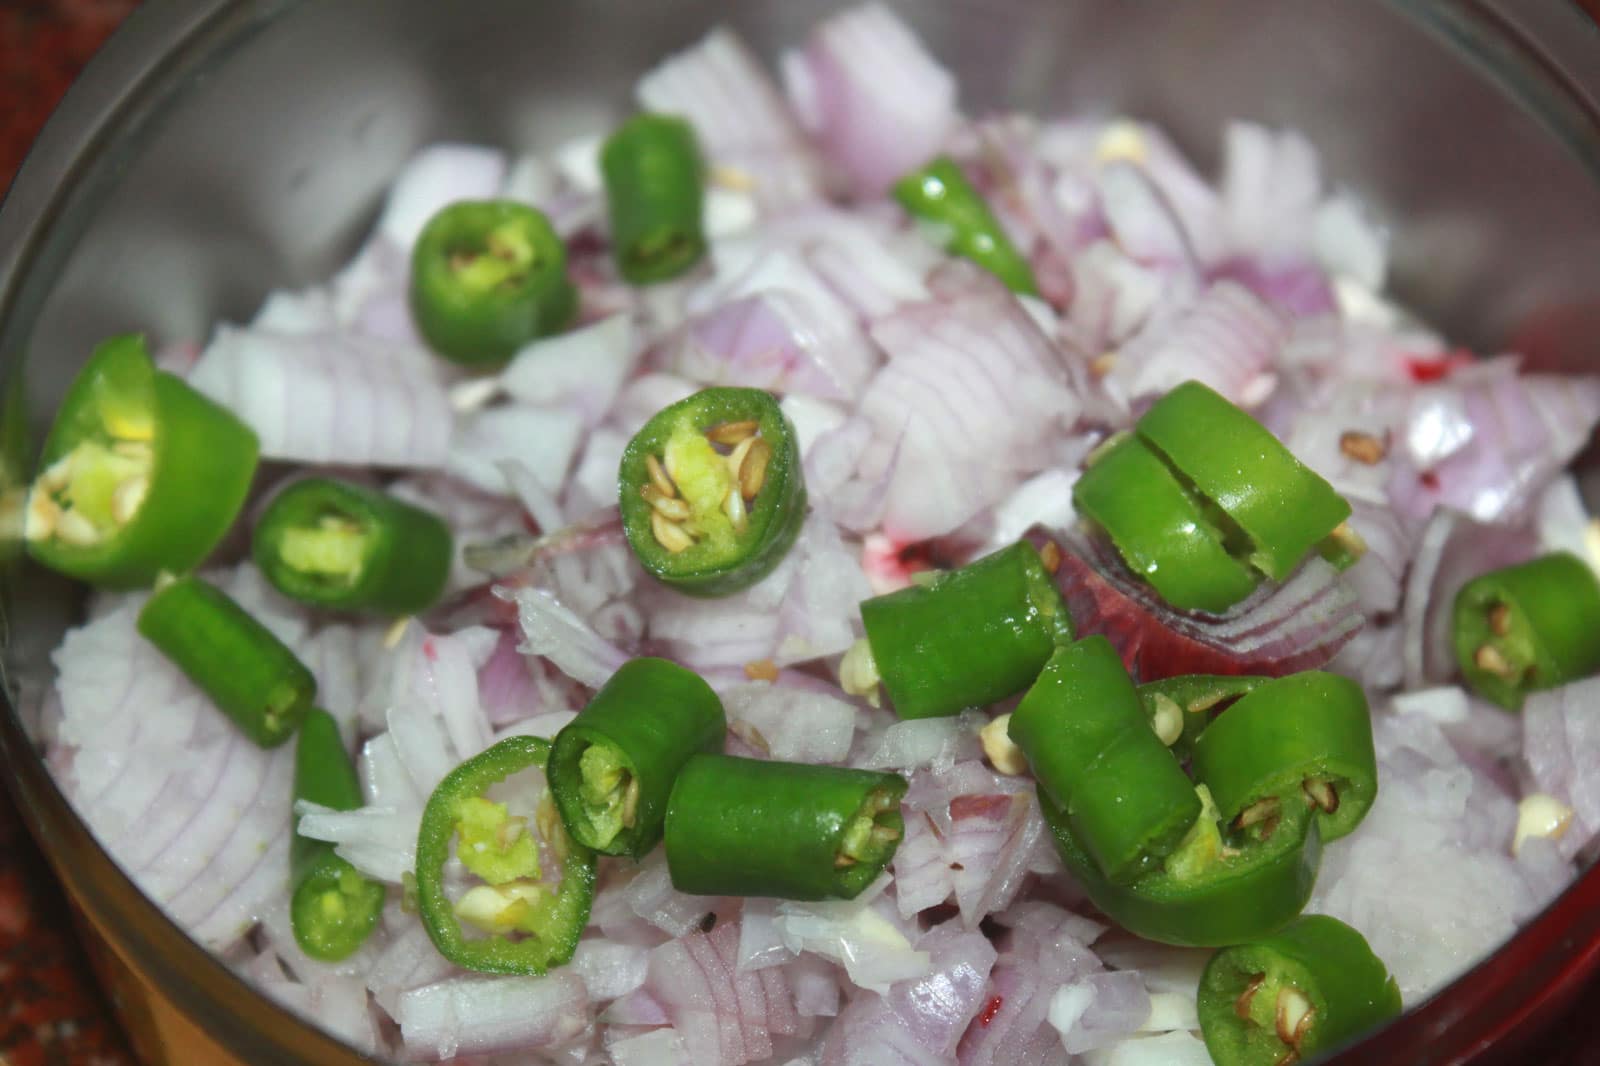 diced green chilies